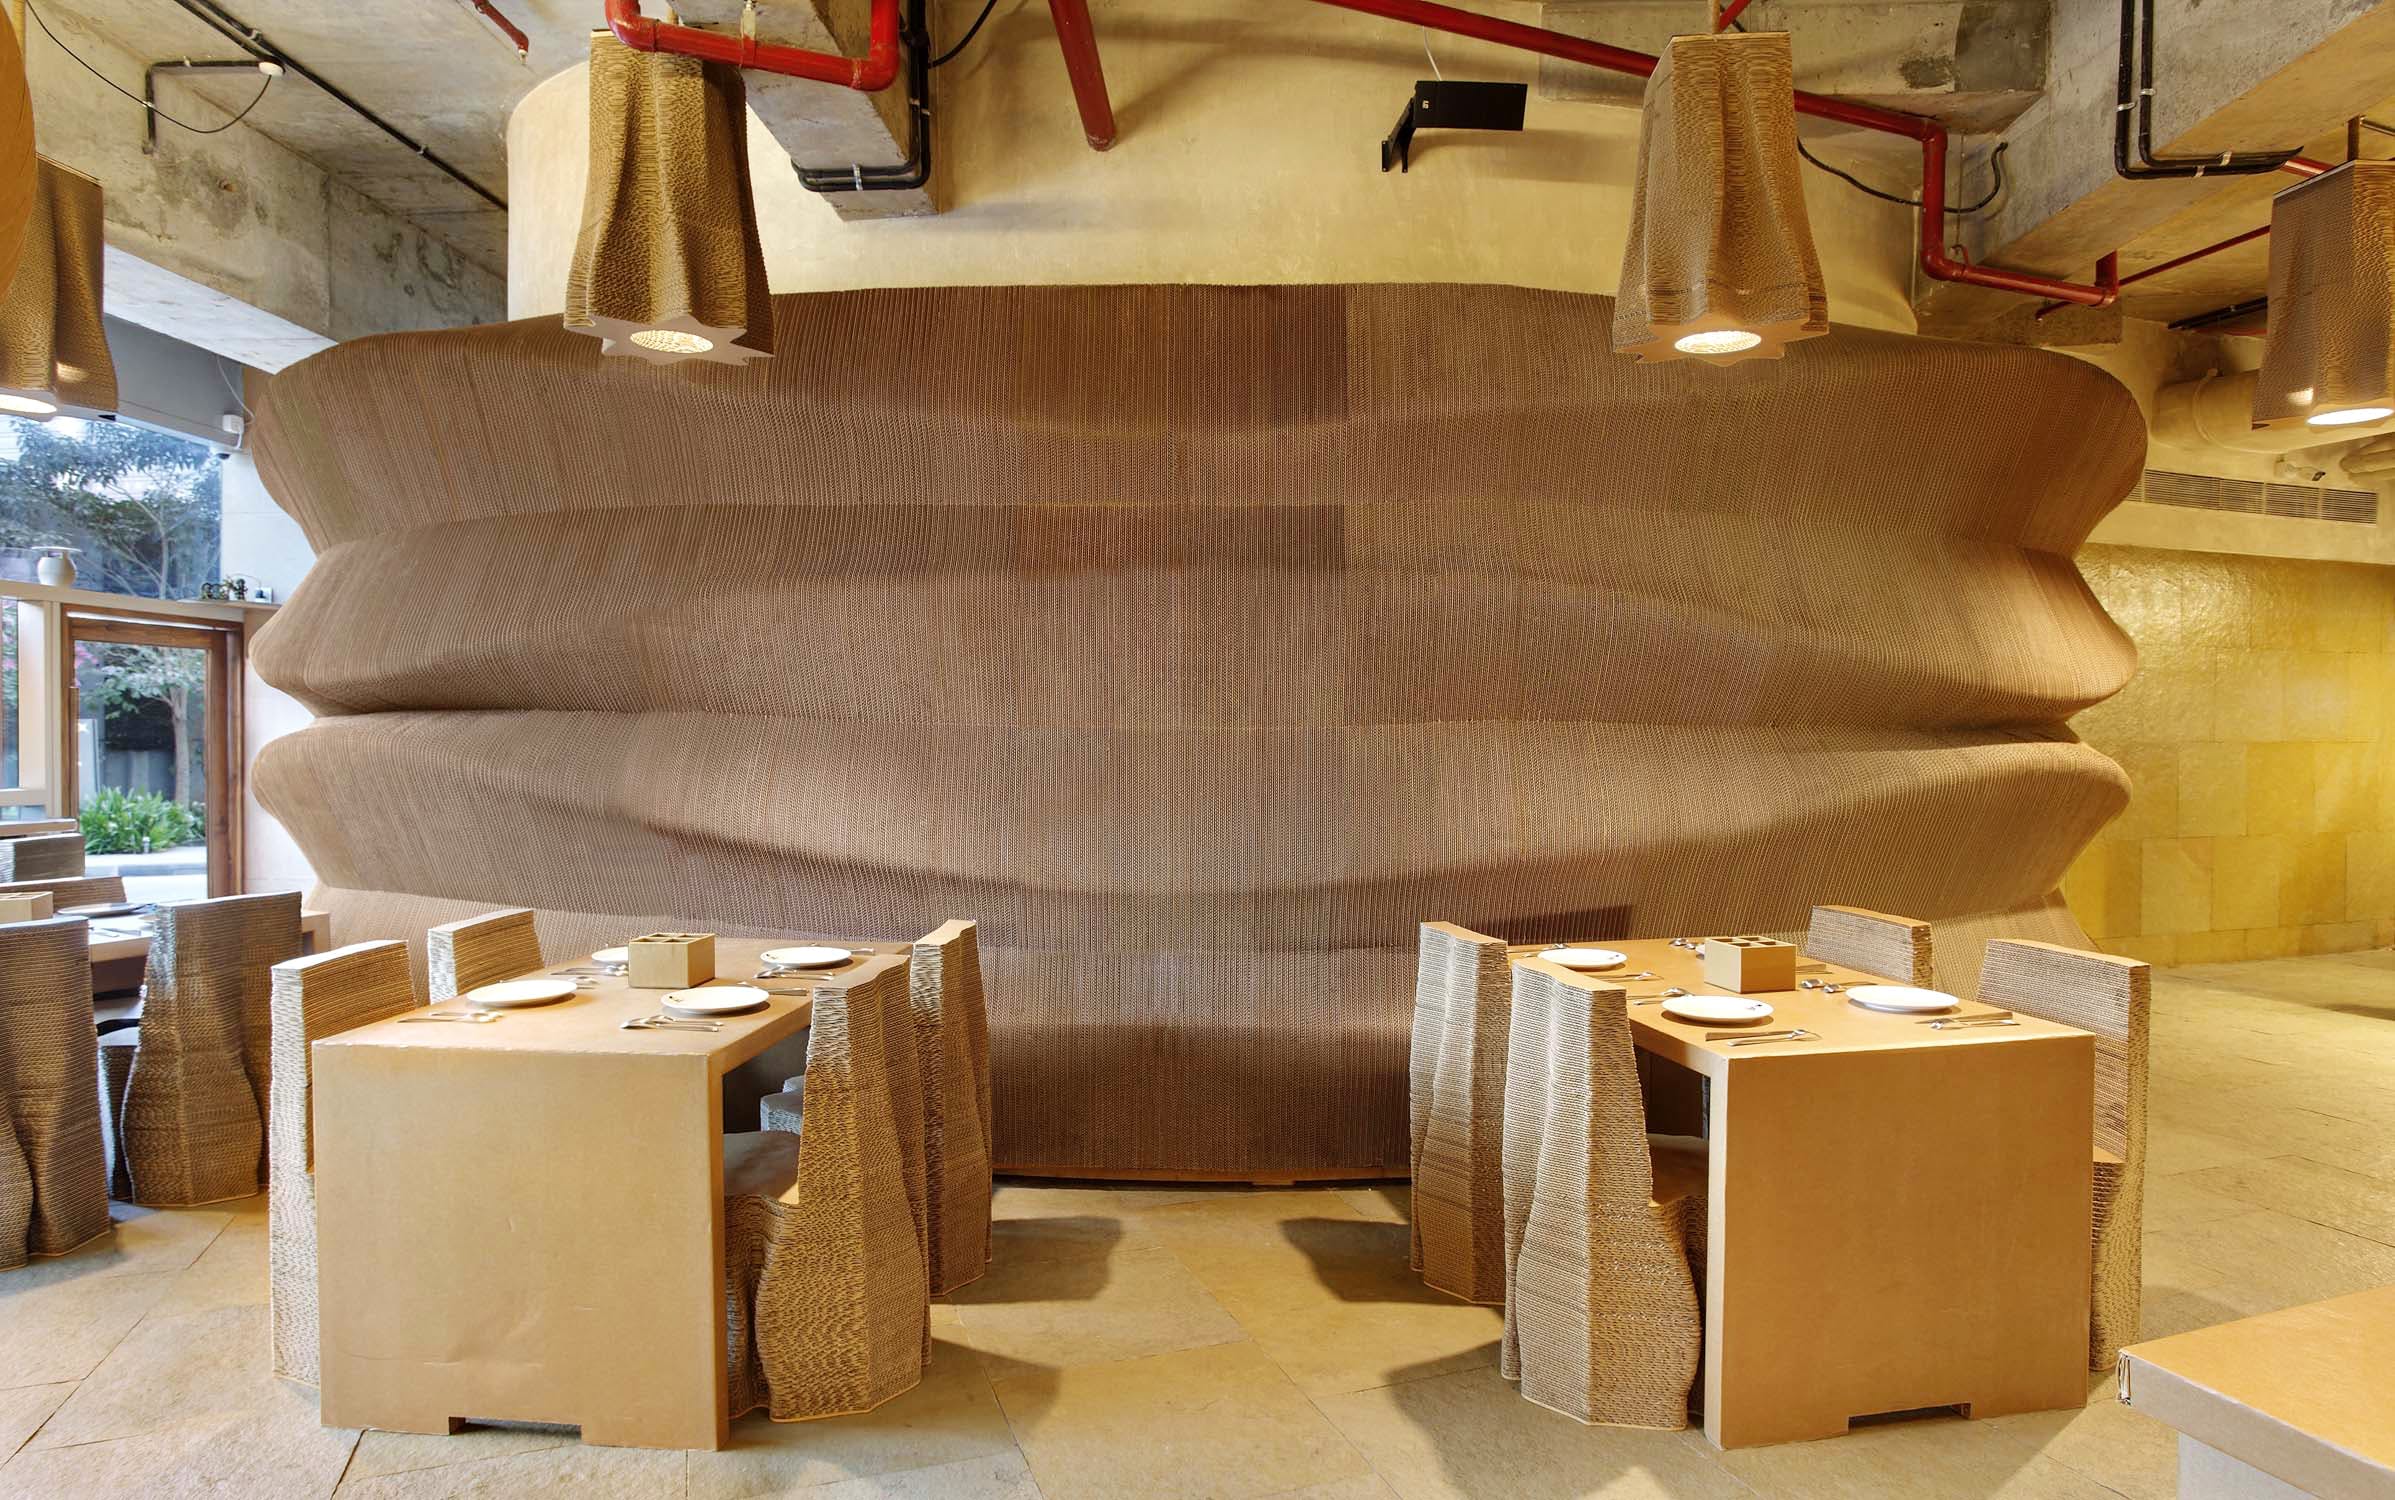 Wood,Table,Furniture,Plywood,Interior design,Sculpture,Architecture,Art,Chair